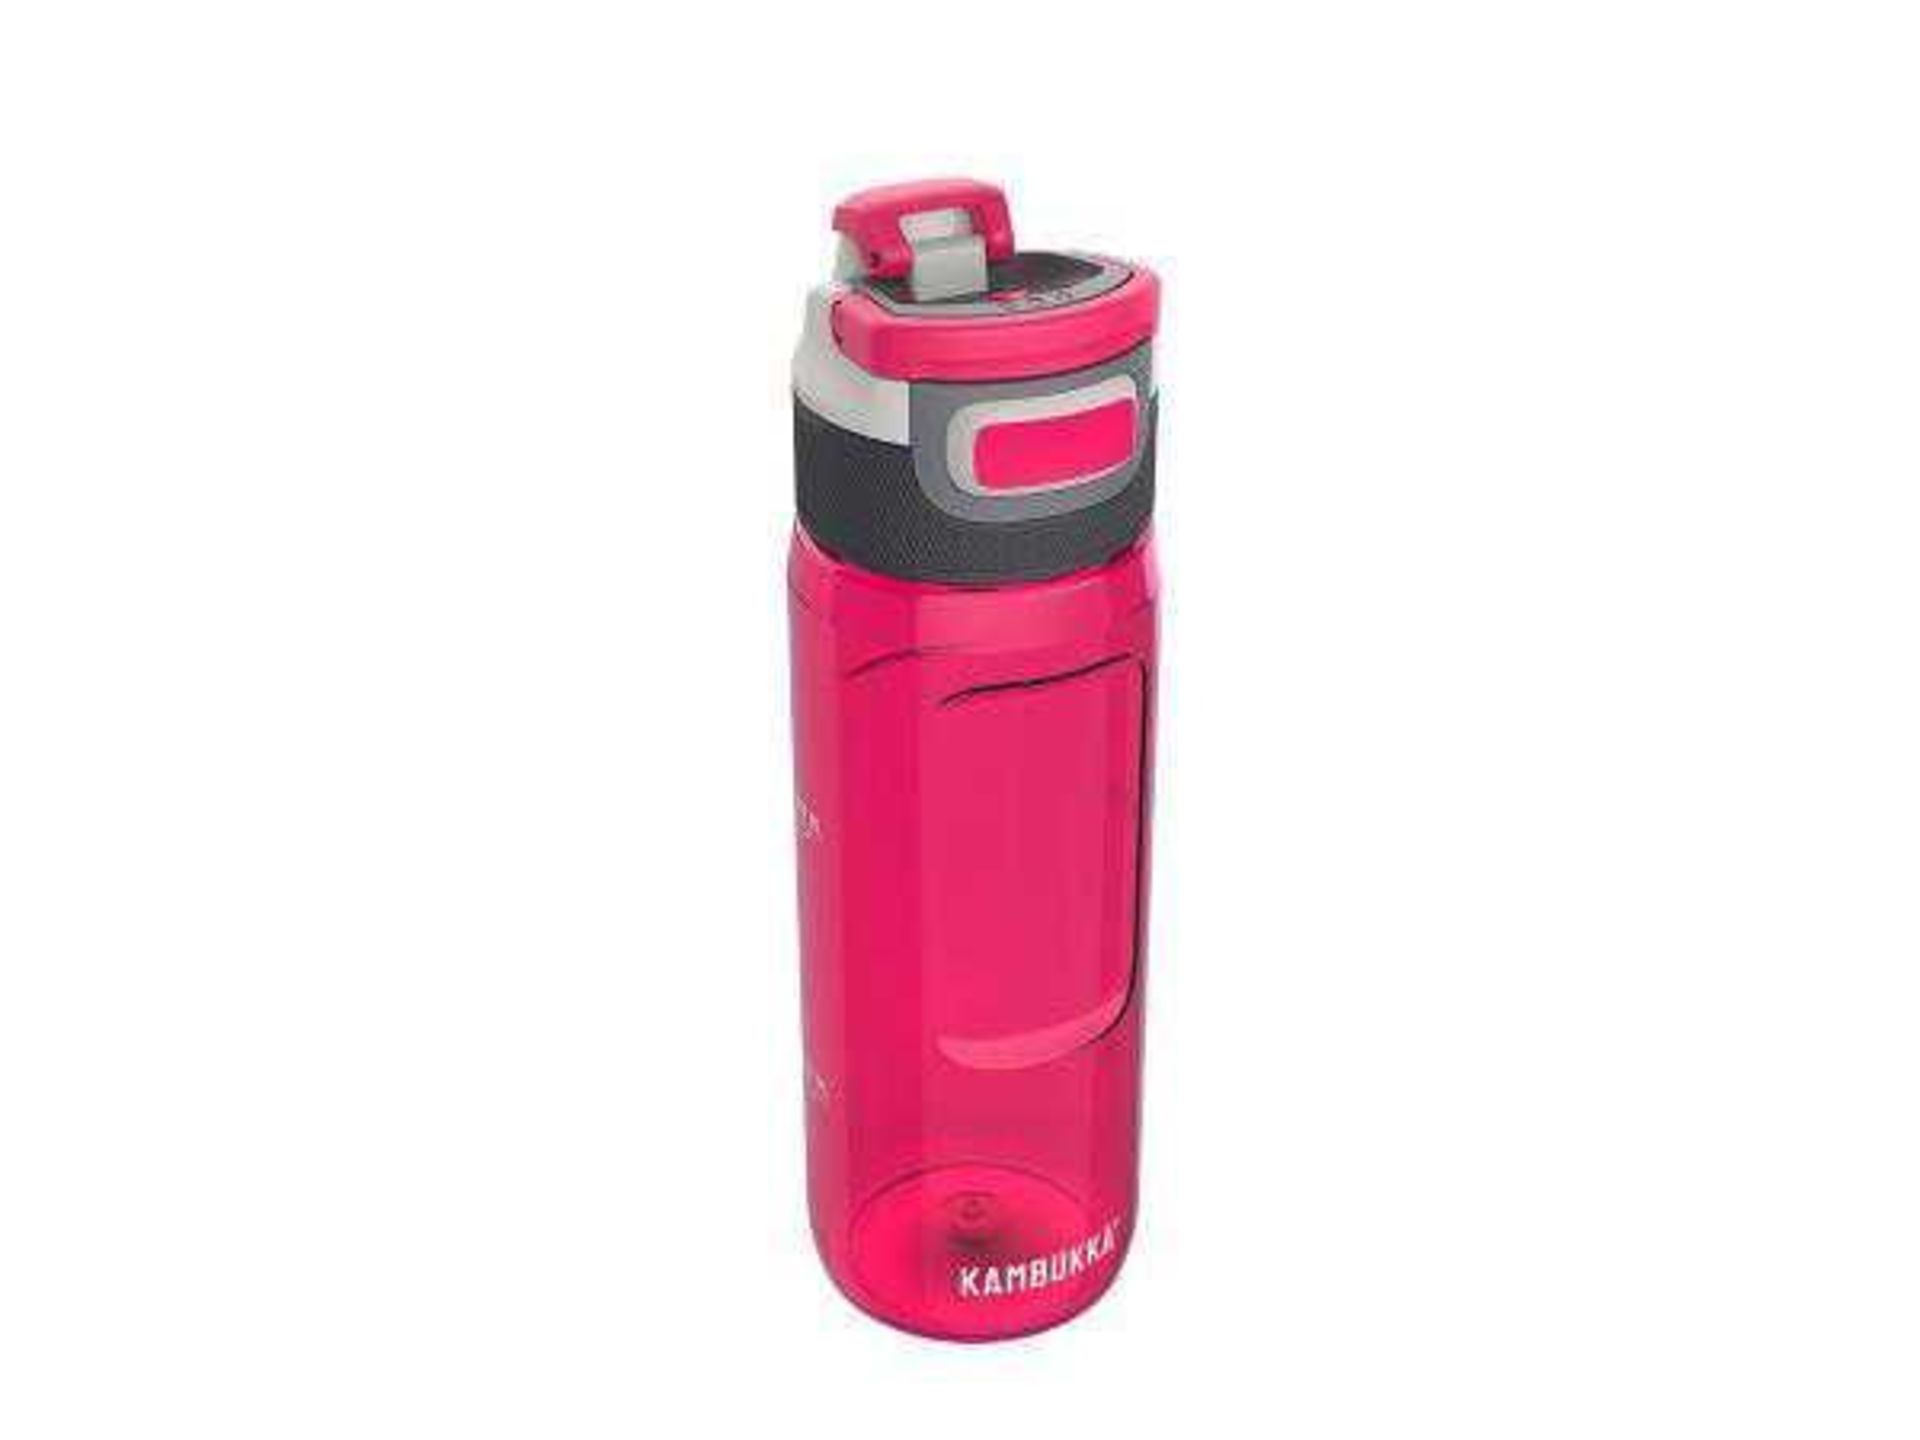 RRP £290 Lot To Contain 16 New Tagged Pink Kambukka Bottles With Locking Lid Mechanism